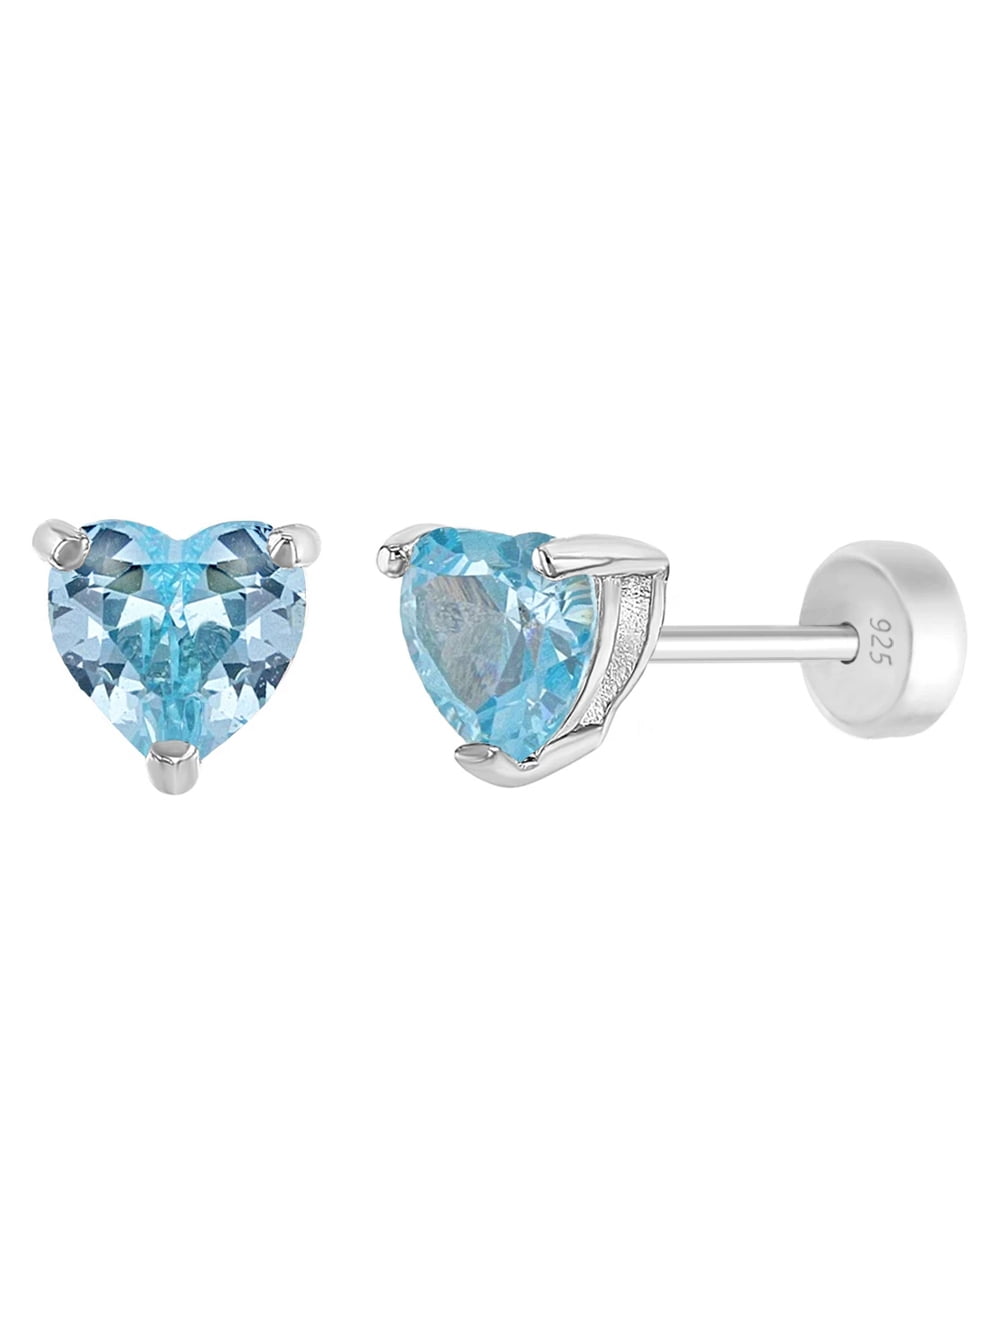 Details about   925 Sterling Silver Tiny Heart Screw Back Earrings for Babies &Toddlers Girls 